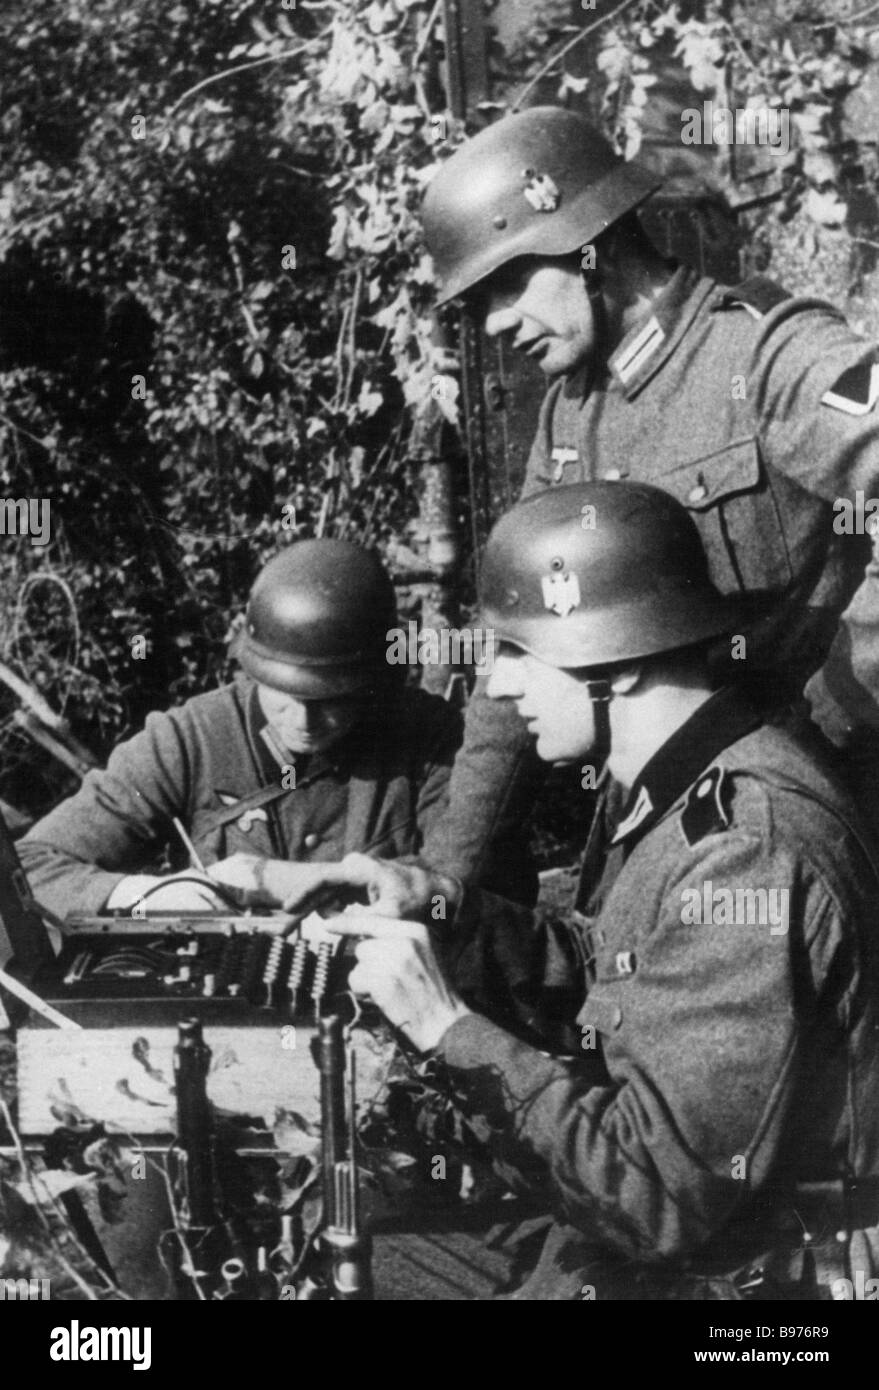 ENIGMA German cypher machine being operated by Wehrmacht troops during WW2 Stock Photo